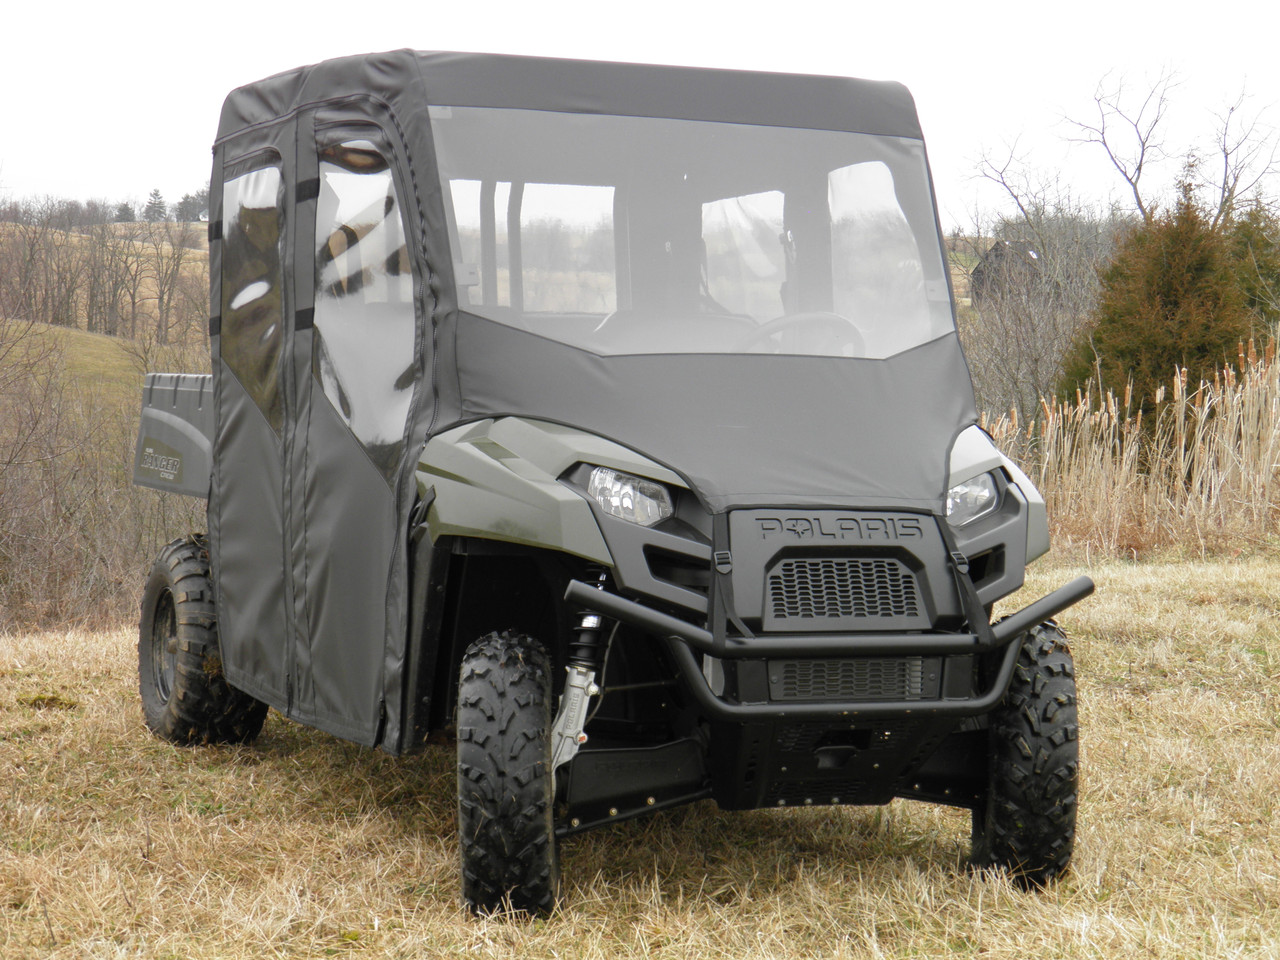 3 Star side x side Polaris Ranger Crew 570-4 full cab enclosure with vinyl windshield front angle view